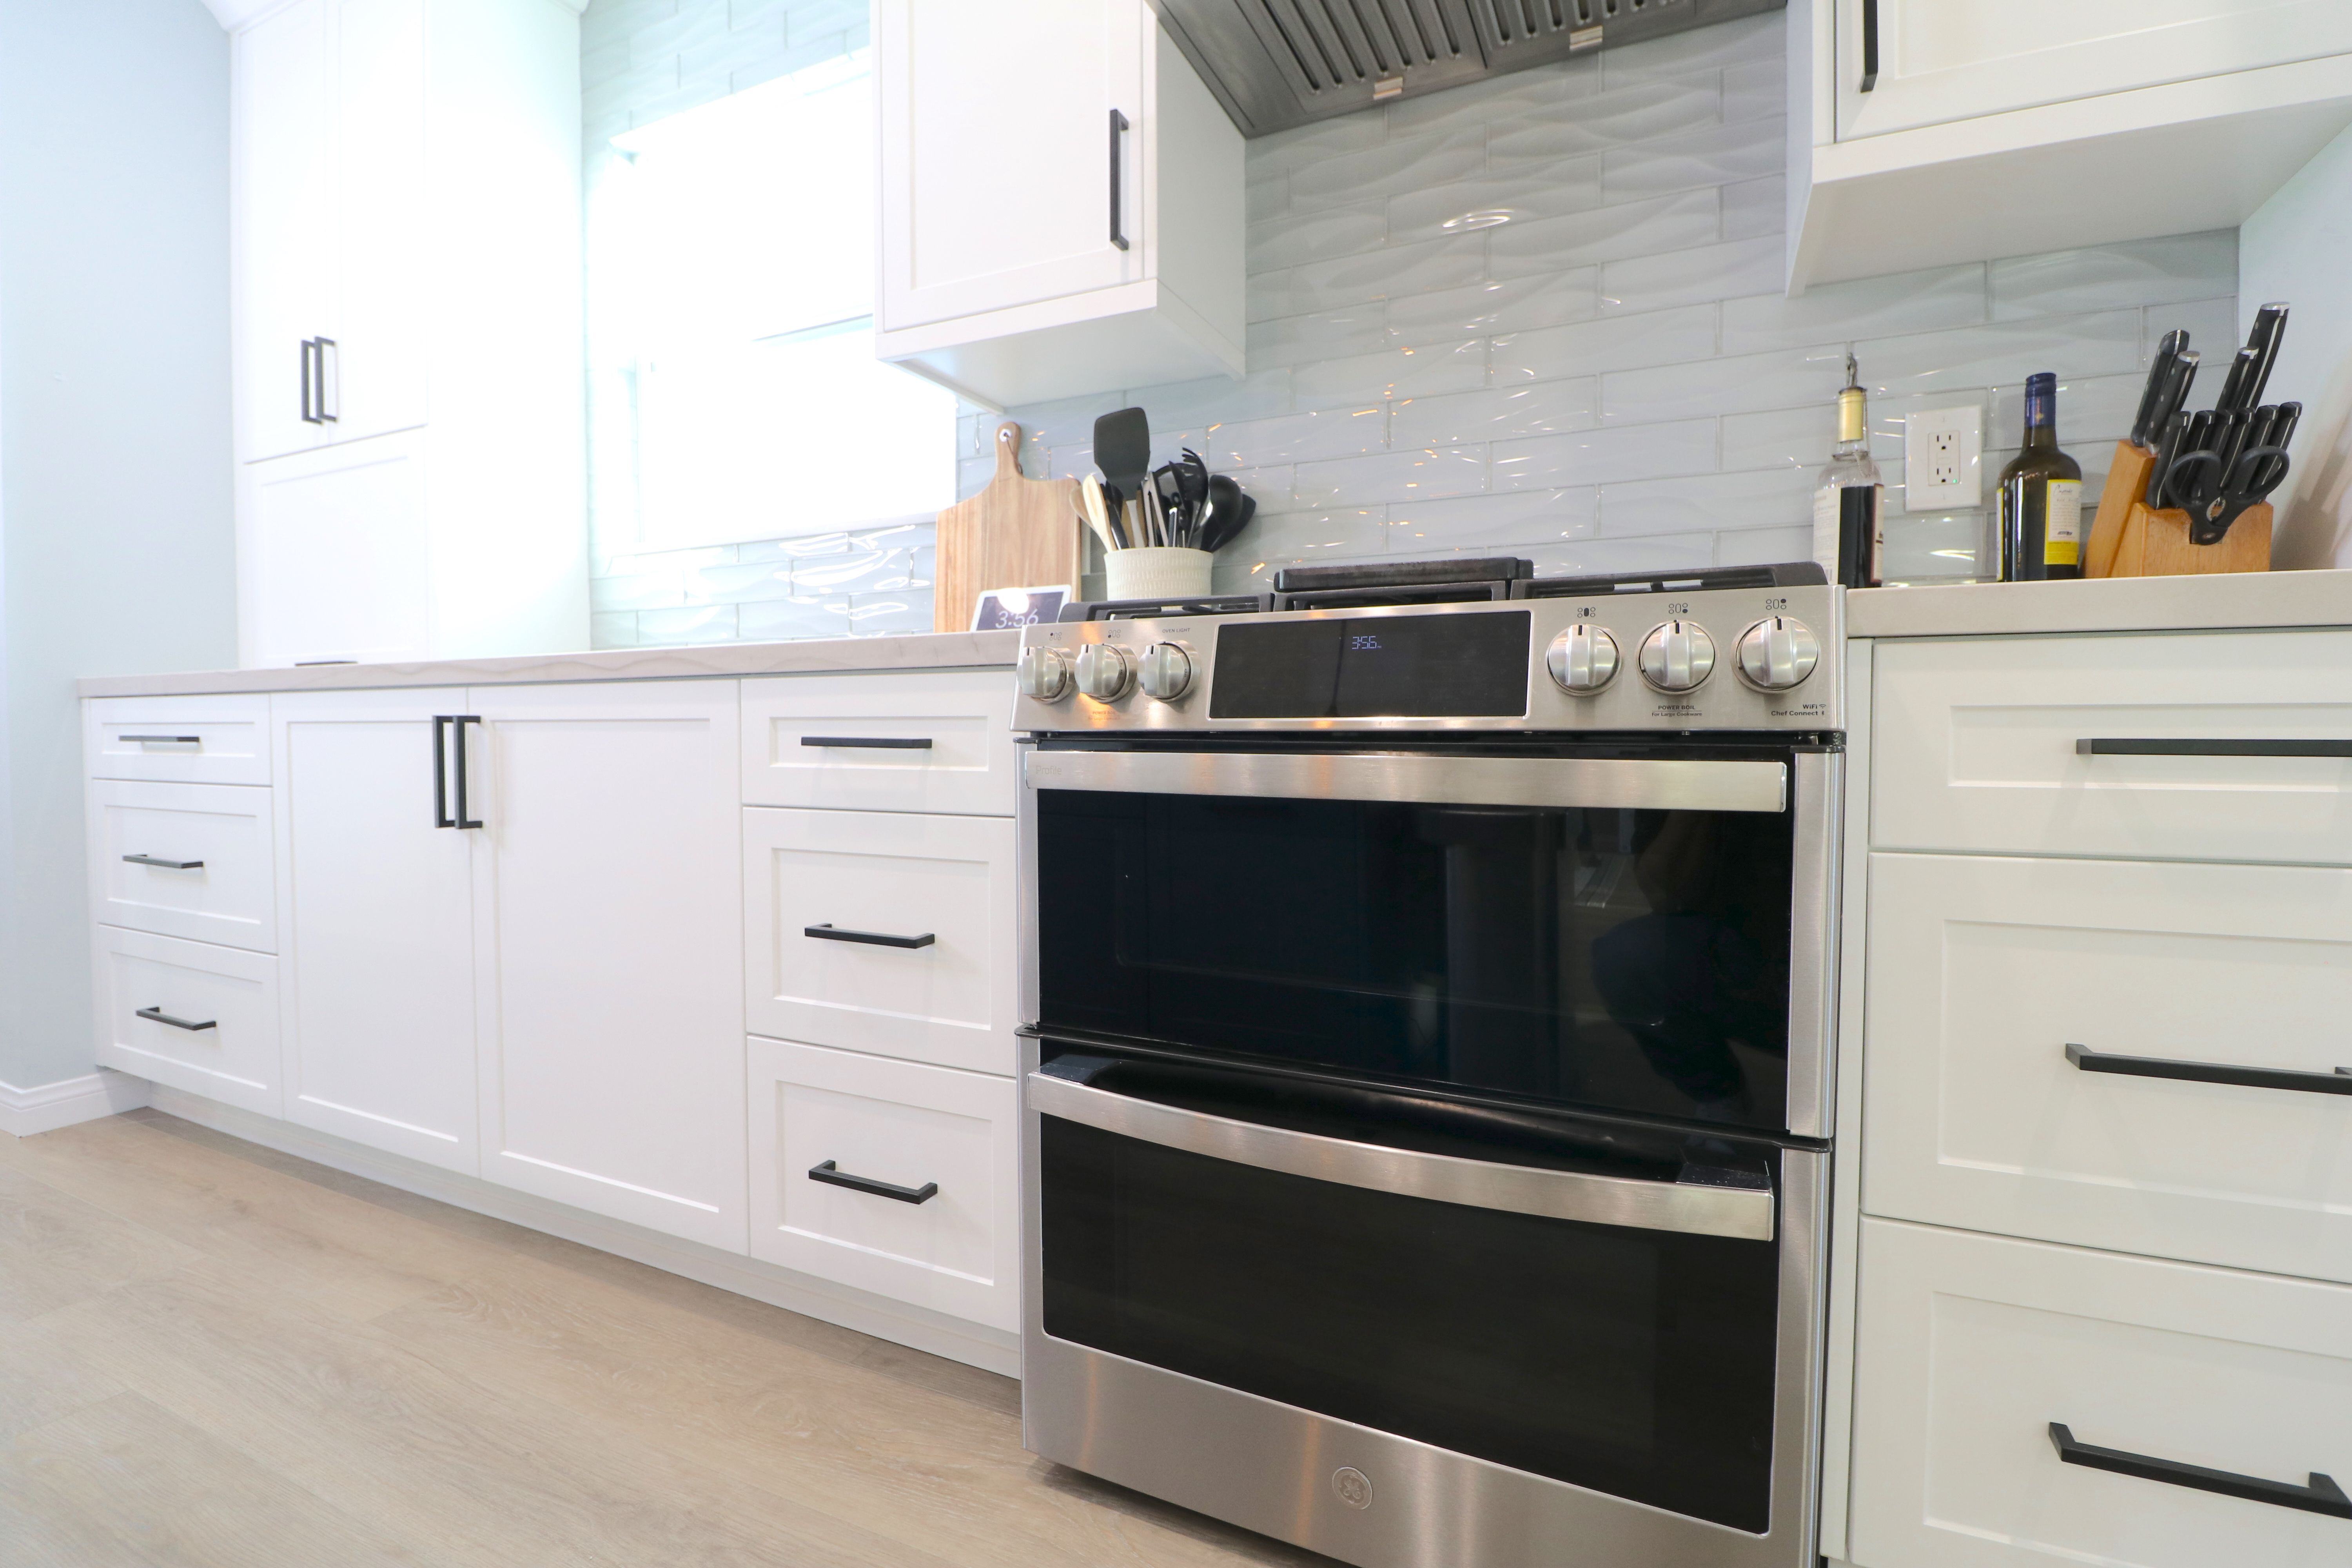 High Gloss Cabinets Steal the Show in an IKEA Kitchen Renovation